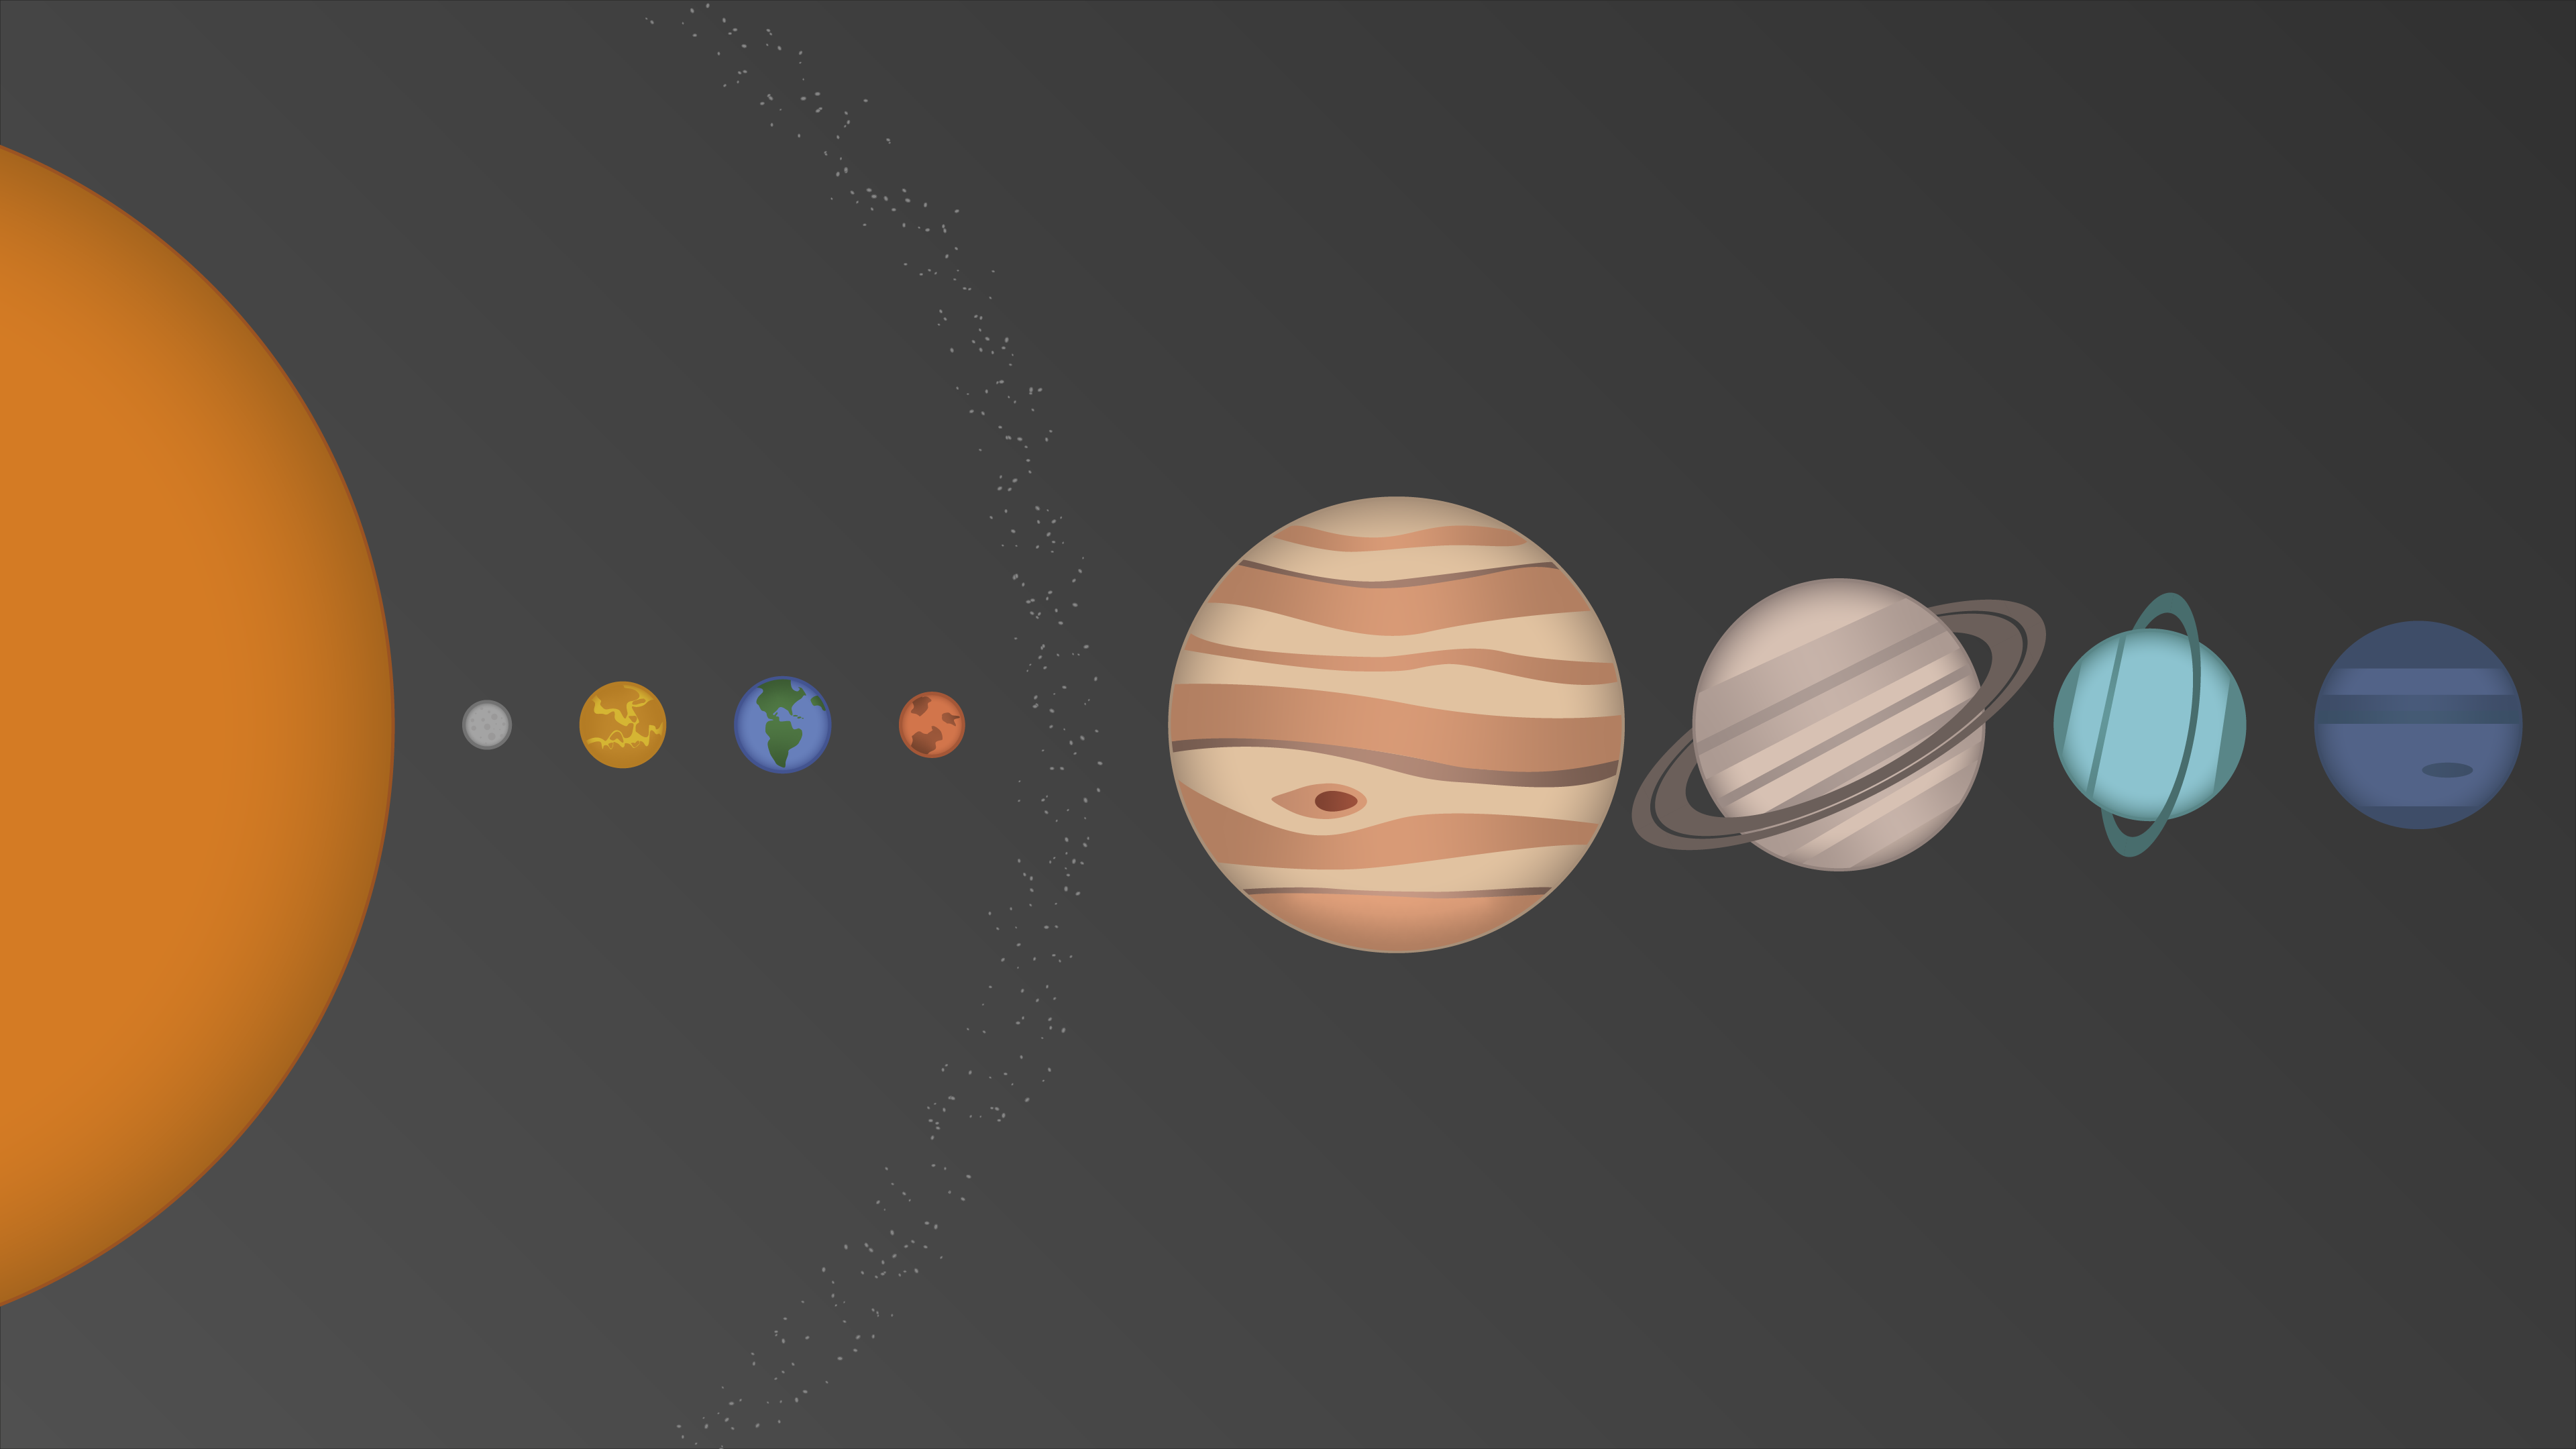 I made a 4K wallpaper of our solar system :)